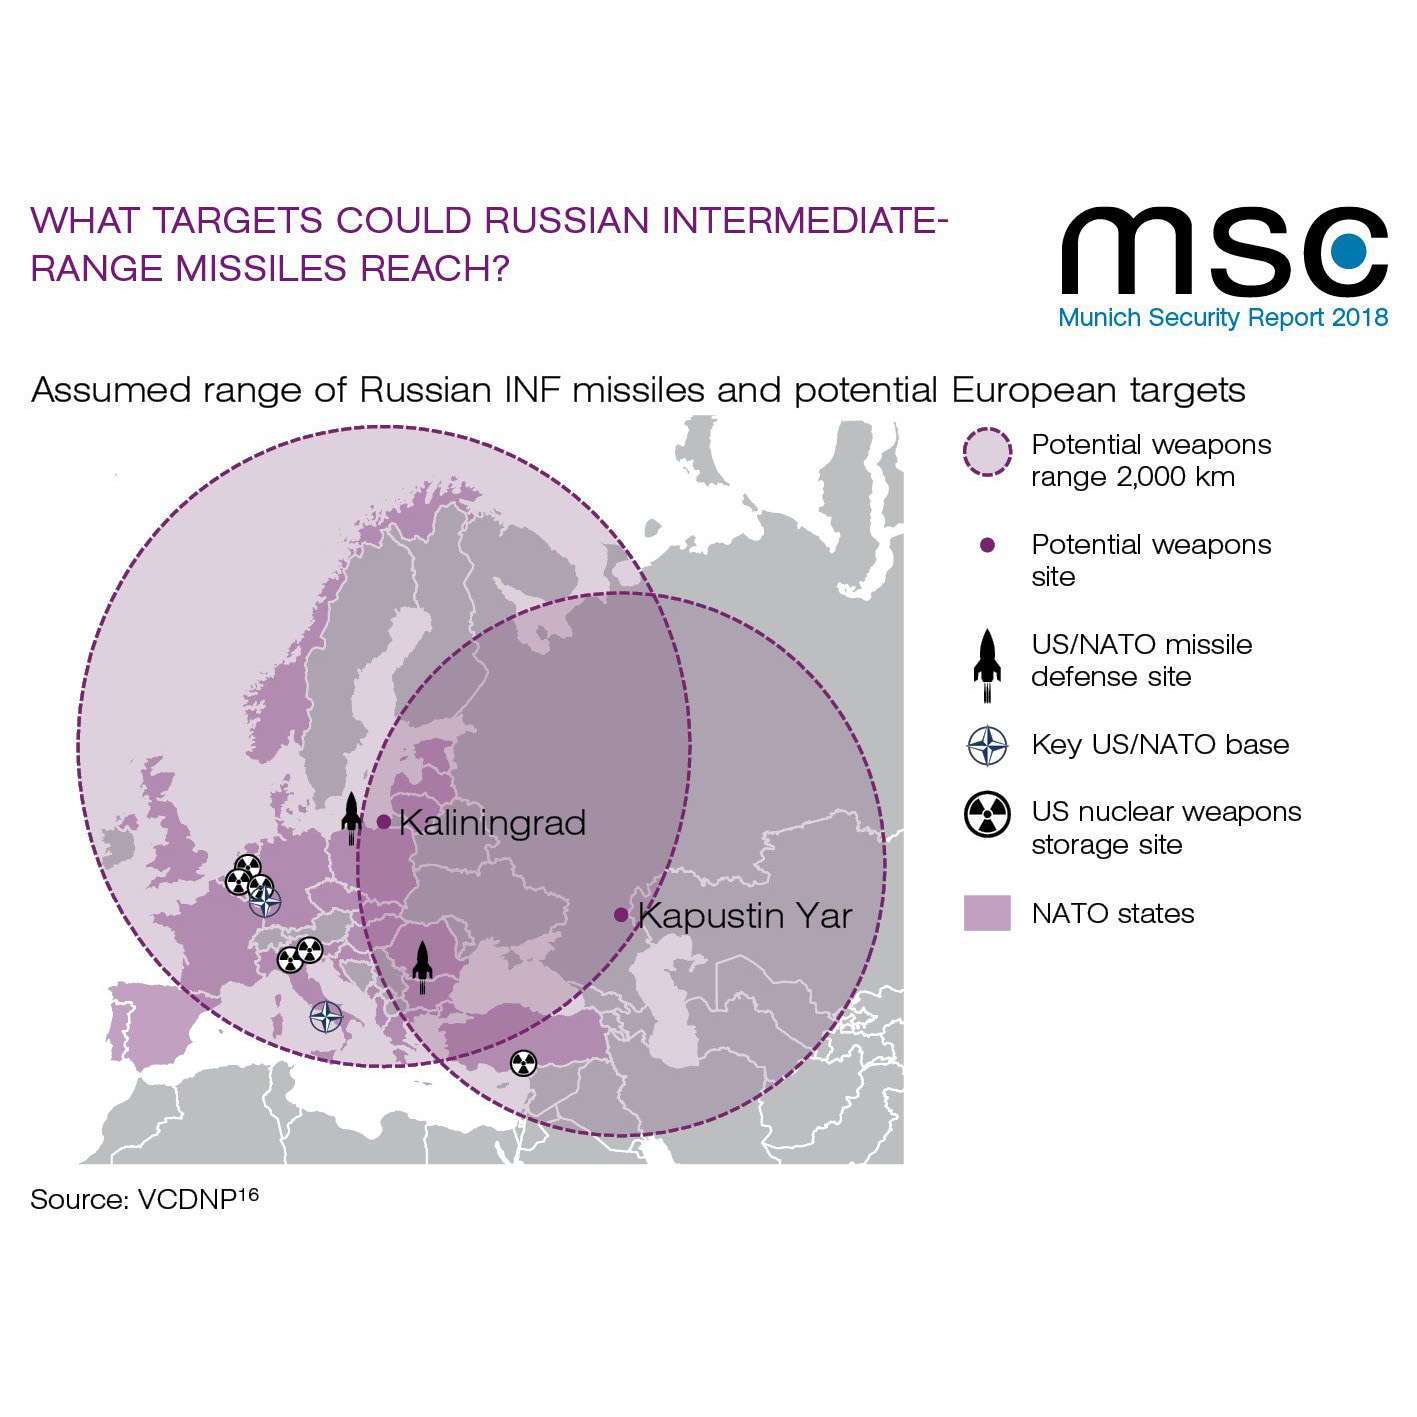 Diagram of Russian IMF missile ranges from the Munich Security Report 2018